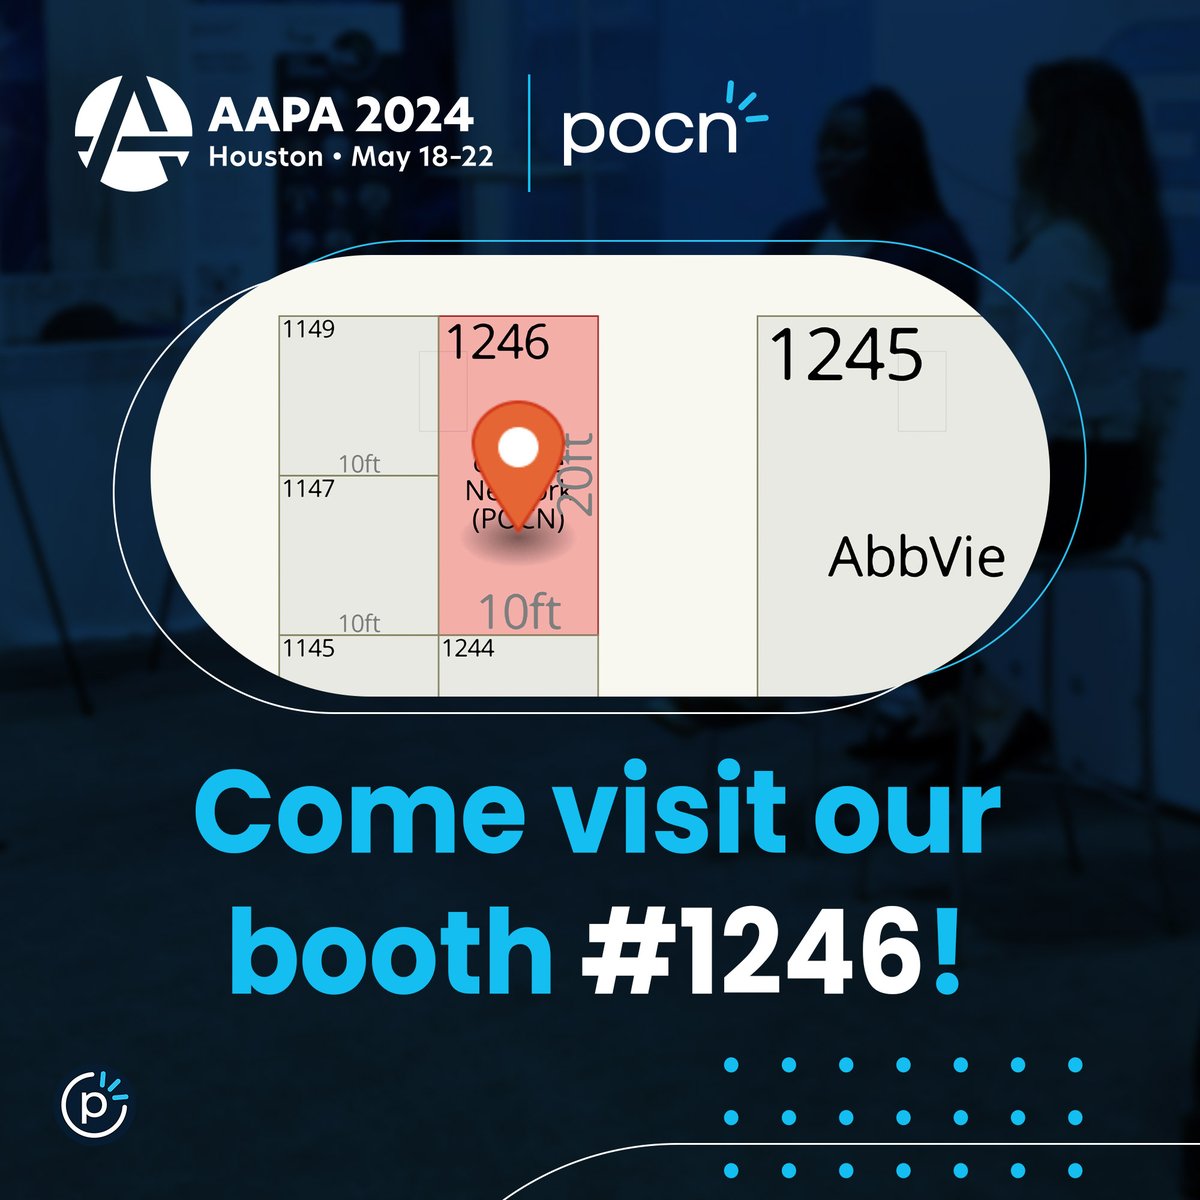 Heading to #AAPA2024 in Houston, TX? Visit our booth 1246 to learn about our PA ambassador program, or nominate a peer for the 2024 ATPA award. Come join us & empower your career!

Event details: aapa.org/conference/
Add us to your planner: tinyurl.com/57r3ybsb

#PAs #POCN